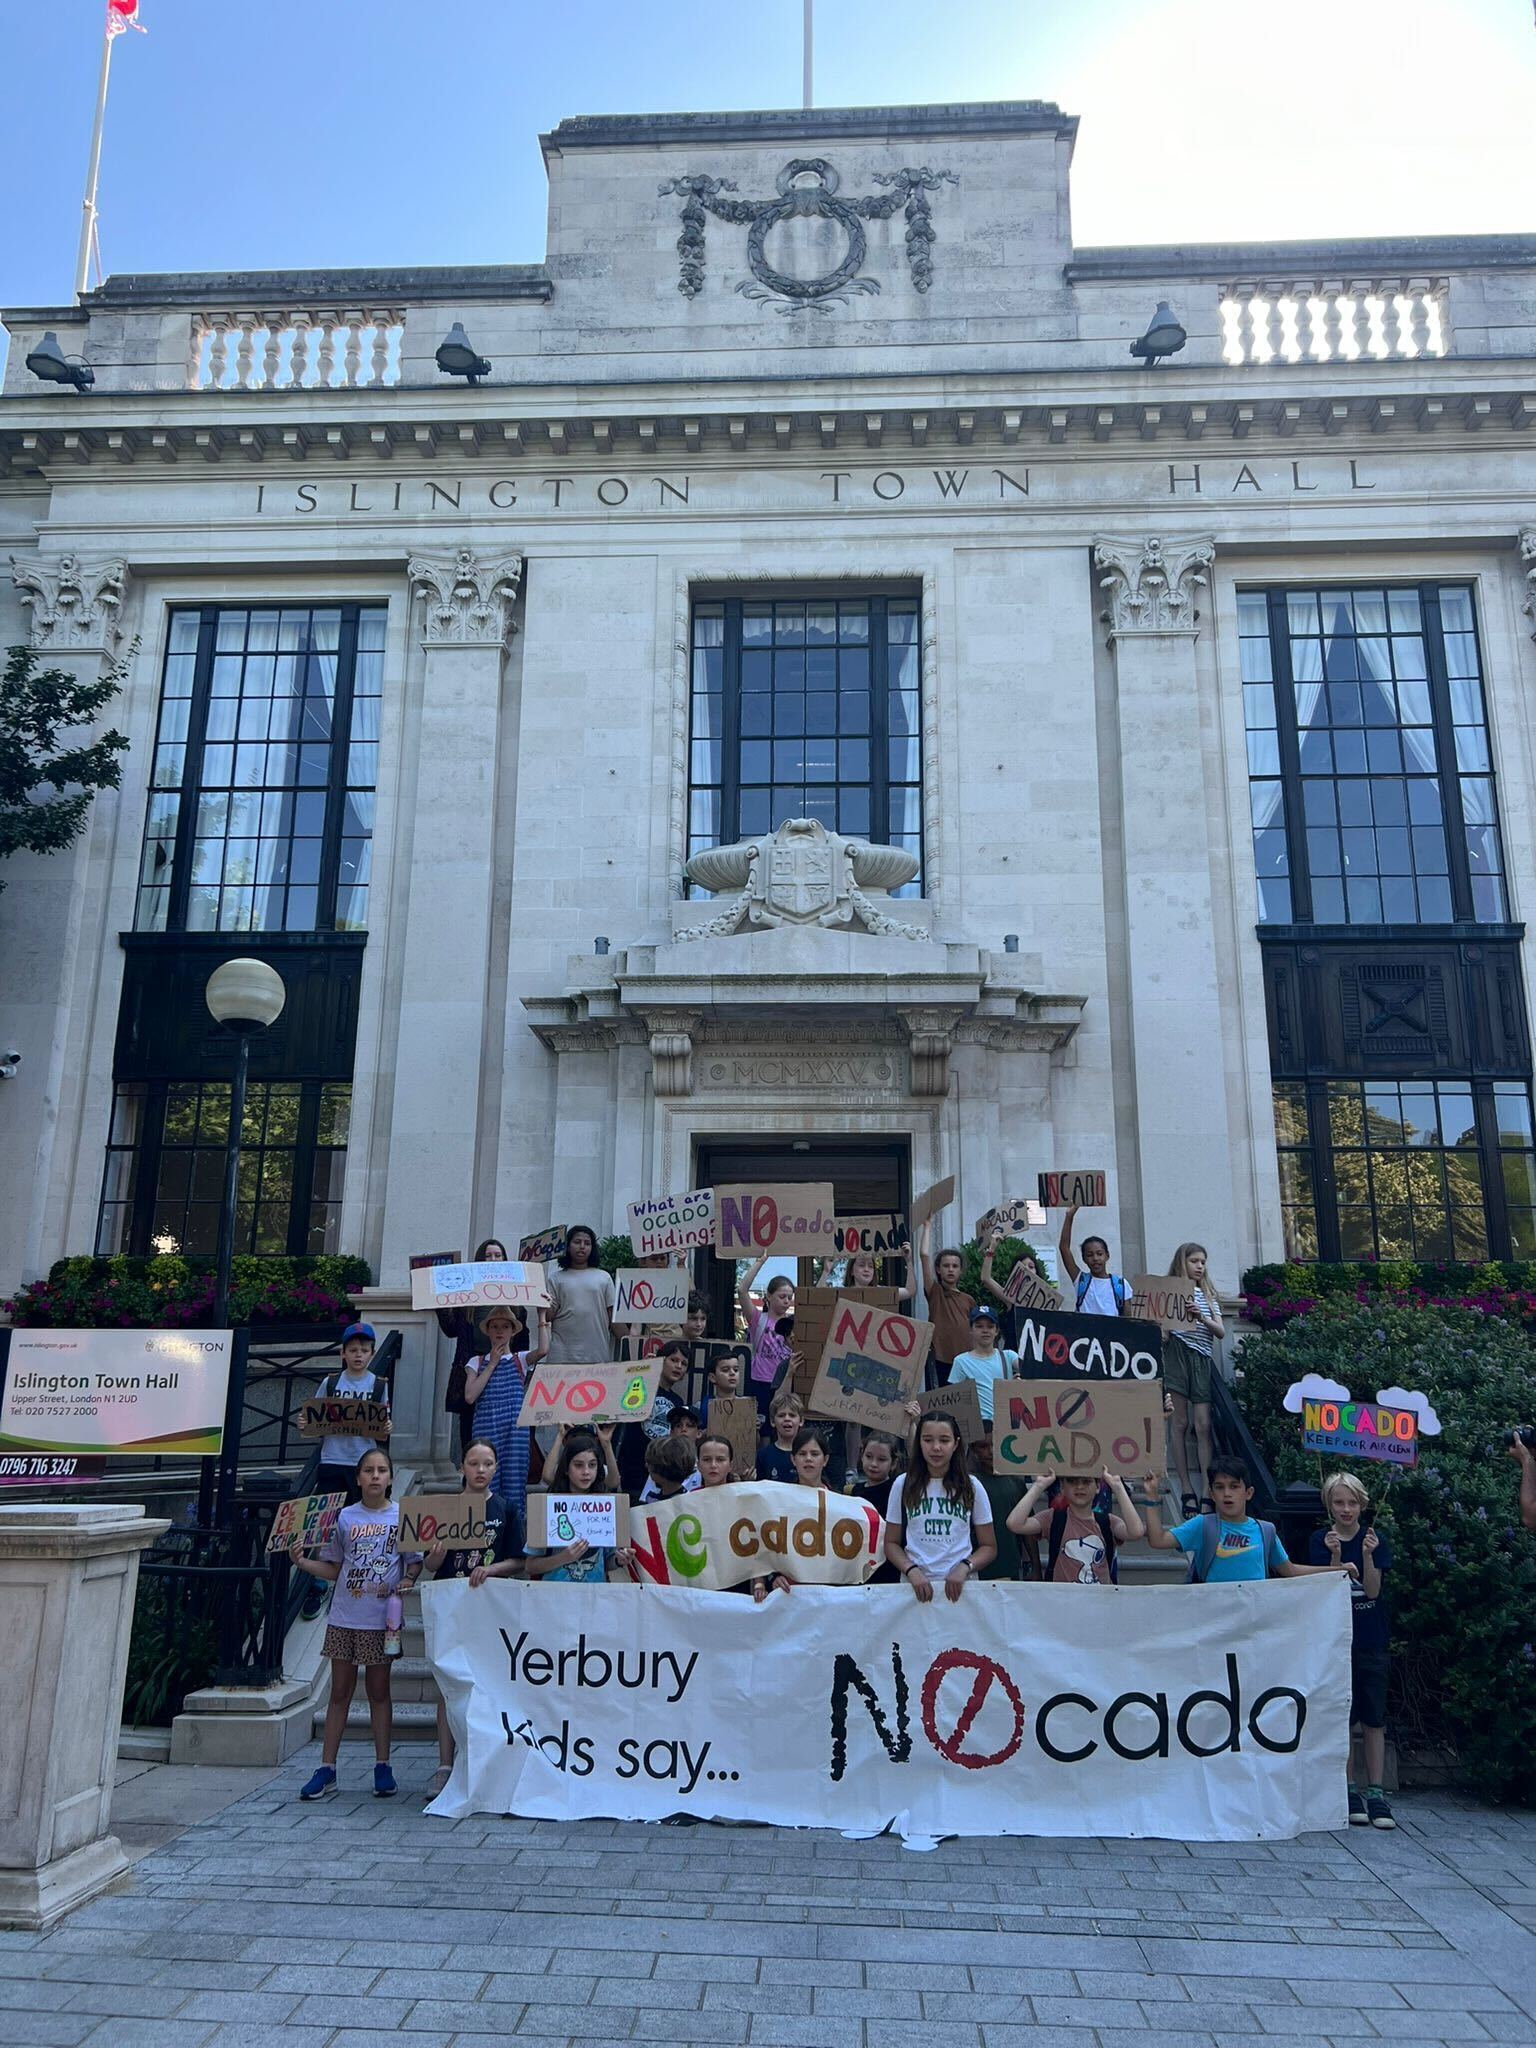 Children from Yerbury Primary School protest outside Islington Town Hall on Tuesday, June 25. Credit: Michael Garnett